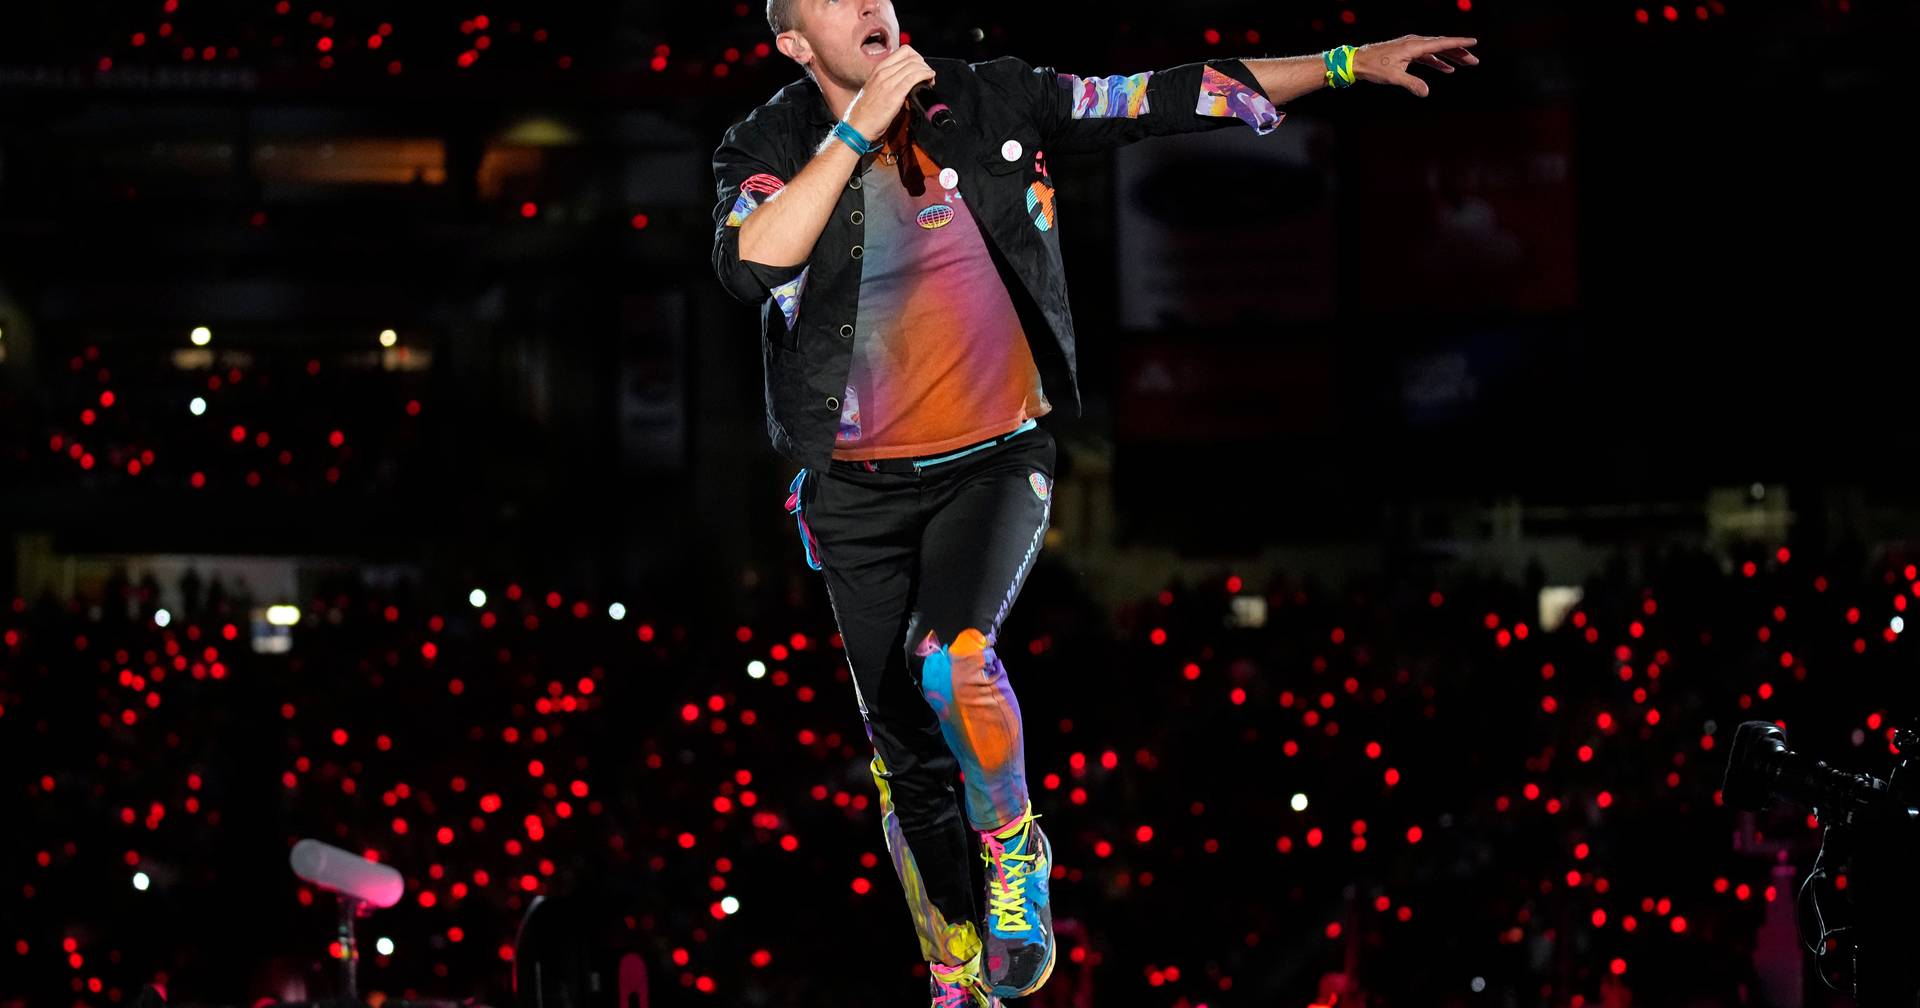 Coldplay concert stirs controversy in Malaysia: some are asking for it to be cancelled